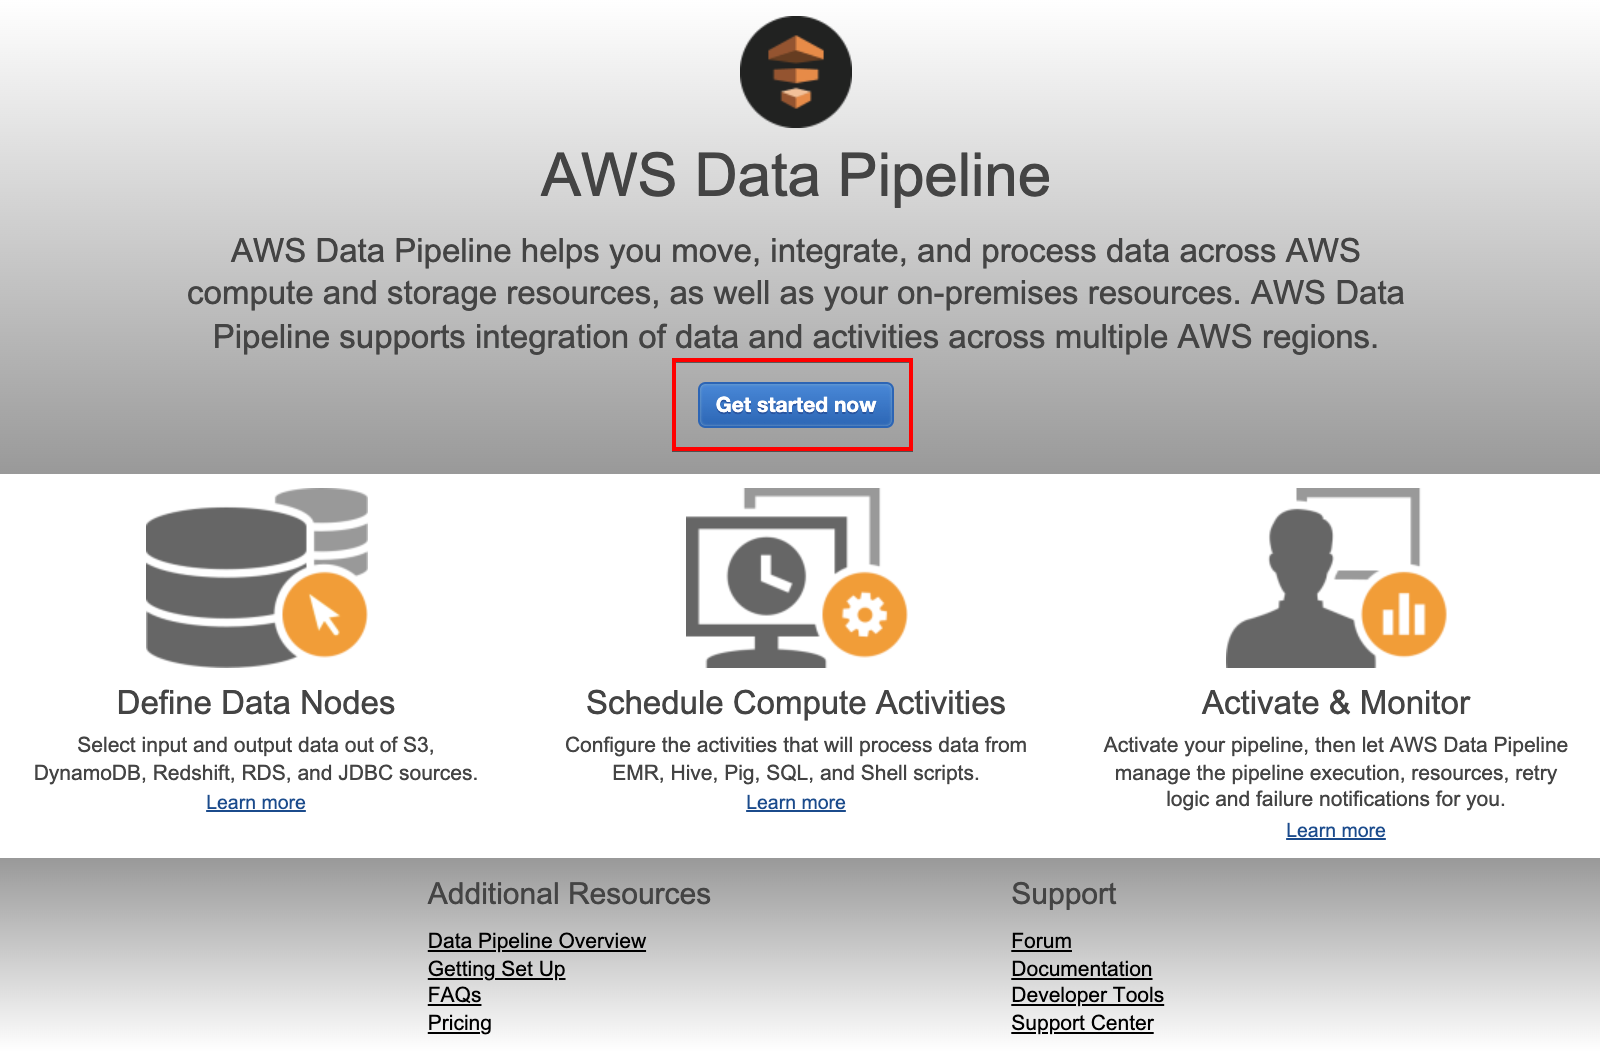 Getting Started with AWS Data Pipeline